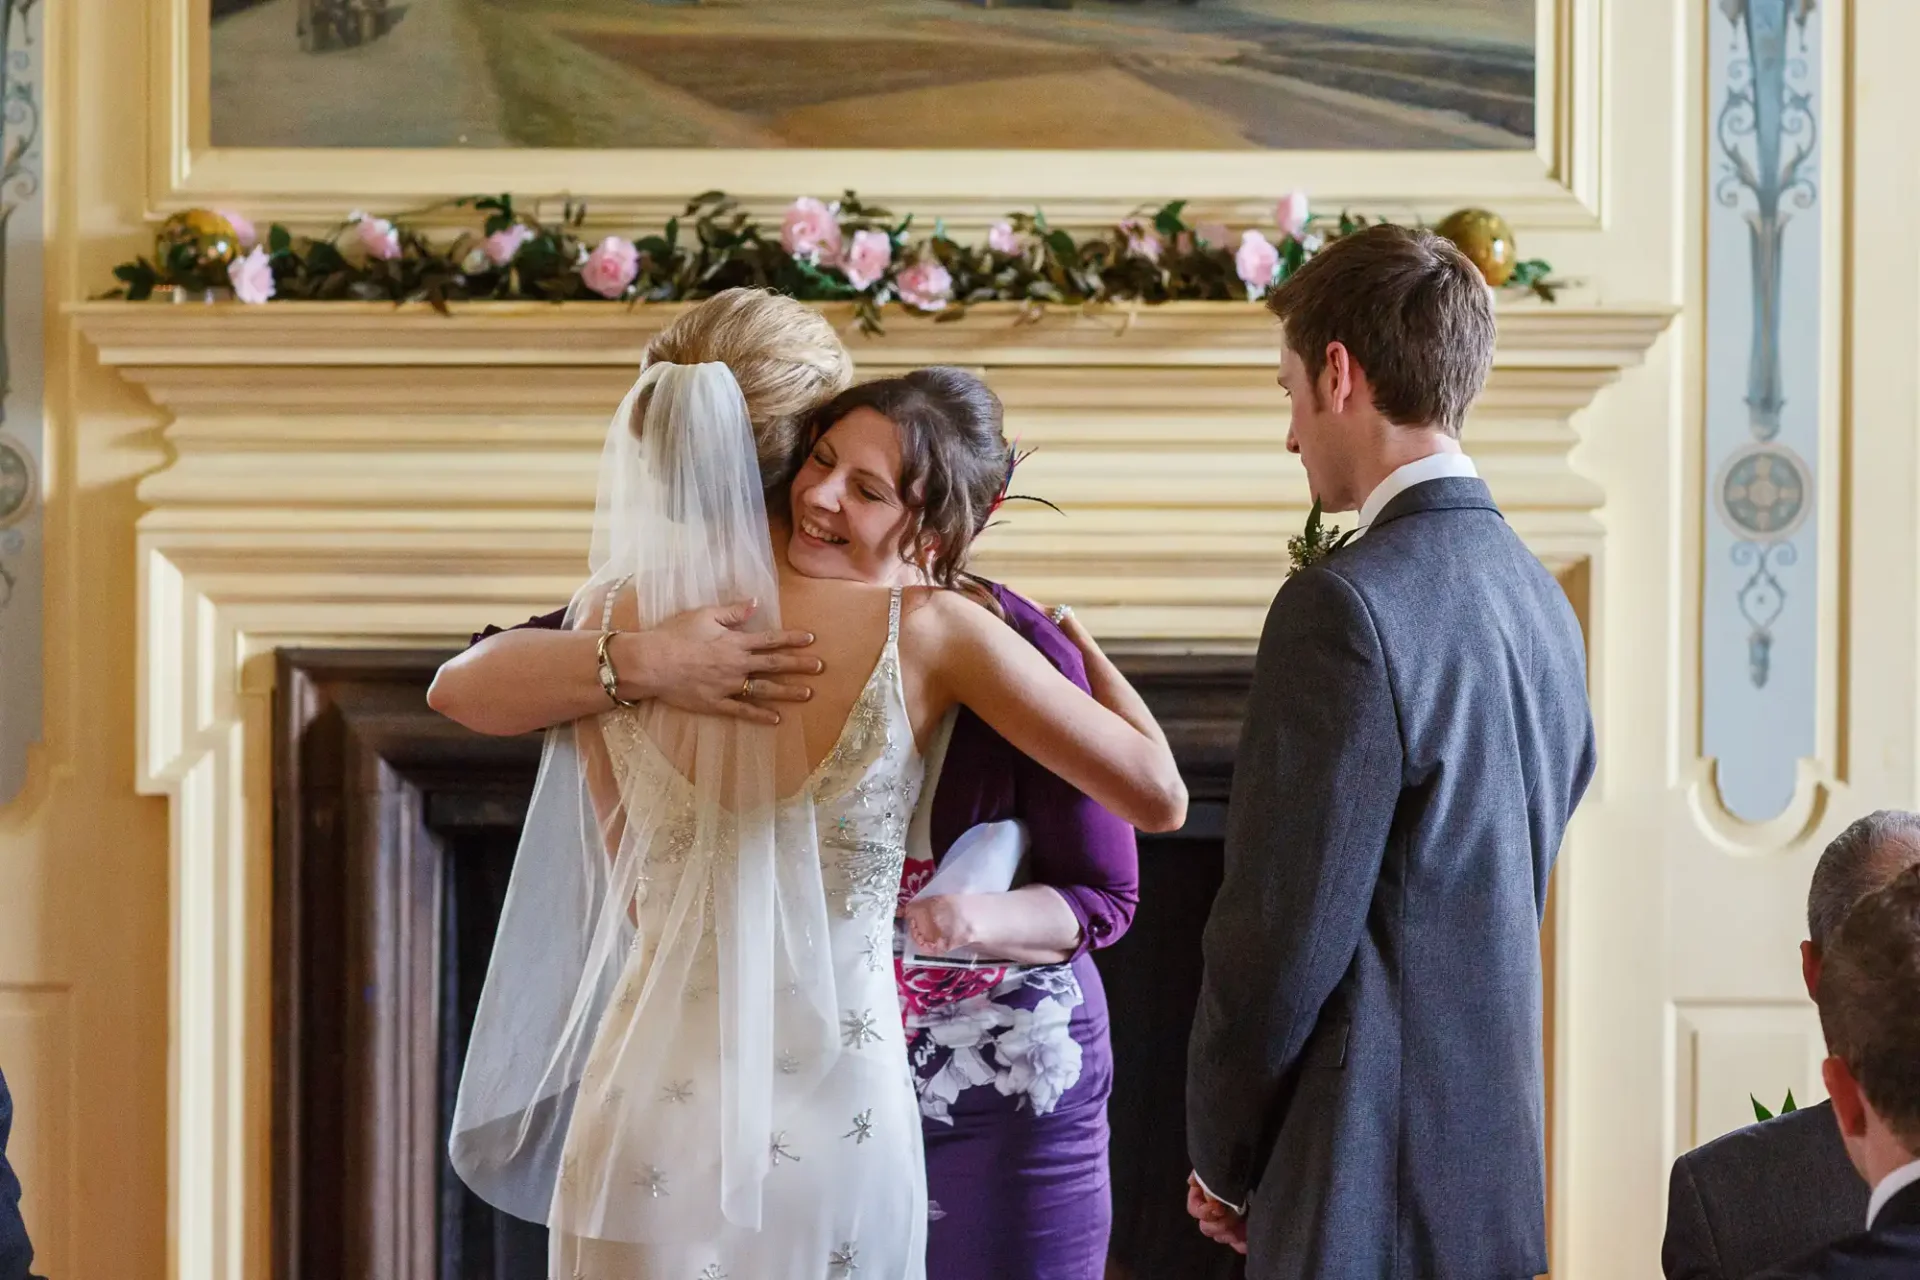 A bride in a white dress and veil embraces a woman in a purple dress, while a man in a gray suit looks on, inside an elegantly decorated room.